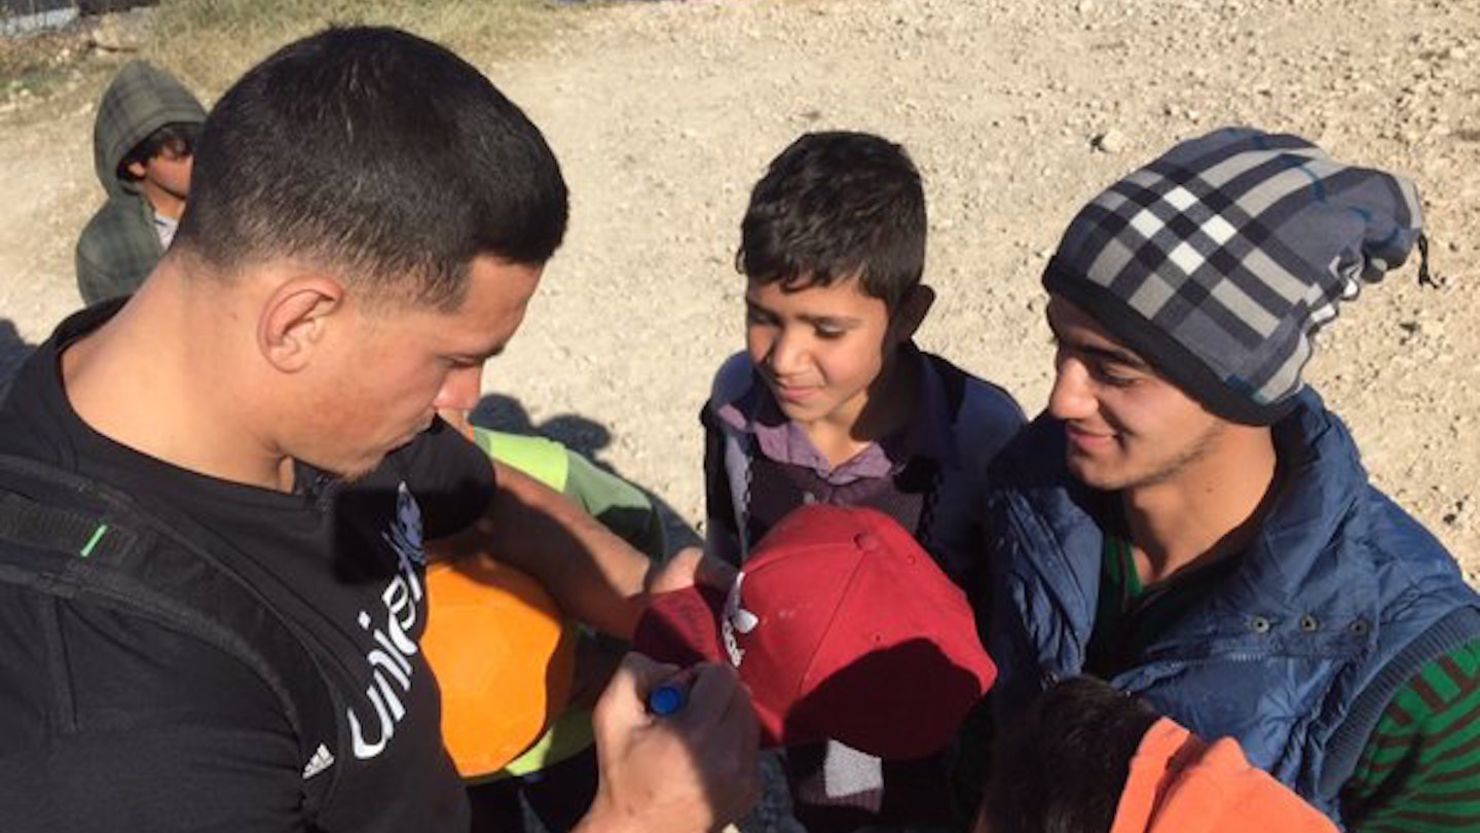 New Zealand rugby star Sonny Bill Williams signs a cap for a Syrian teenager at a refugee camp in Lebanon.